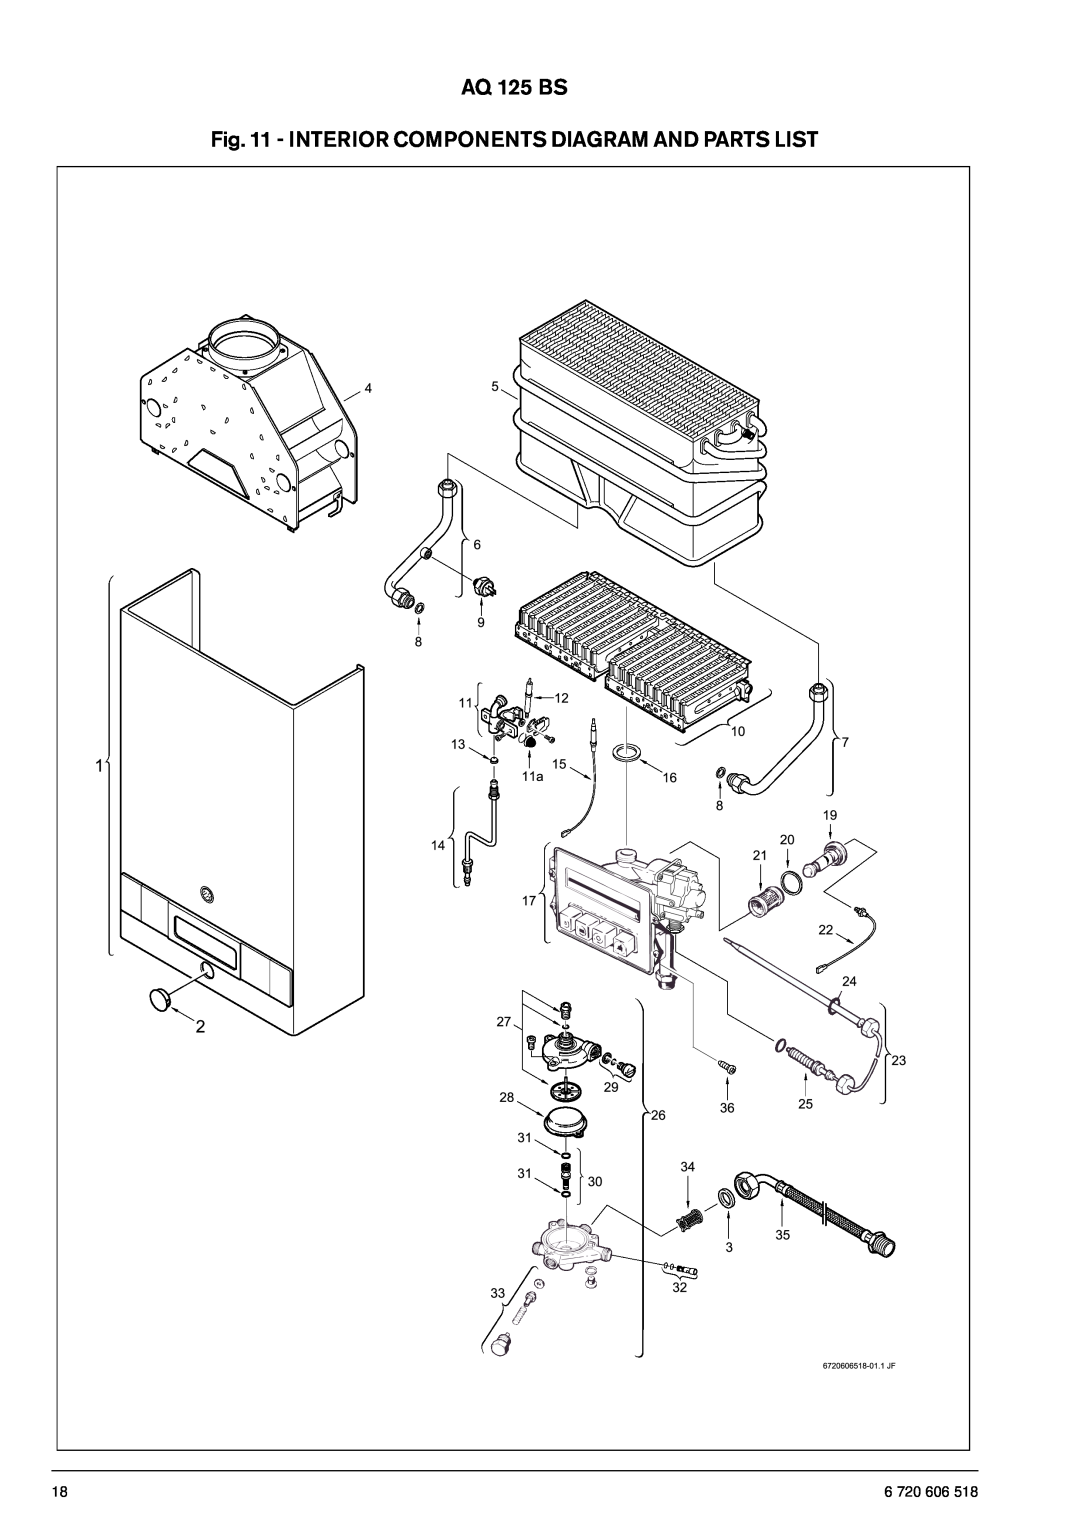 Bosch Appliances 125B NGS, 125B LPS operating instructions AQ 125 BS - INTERIOR COMPONENTS DIAGRAM AND PARTS LIST 